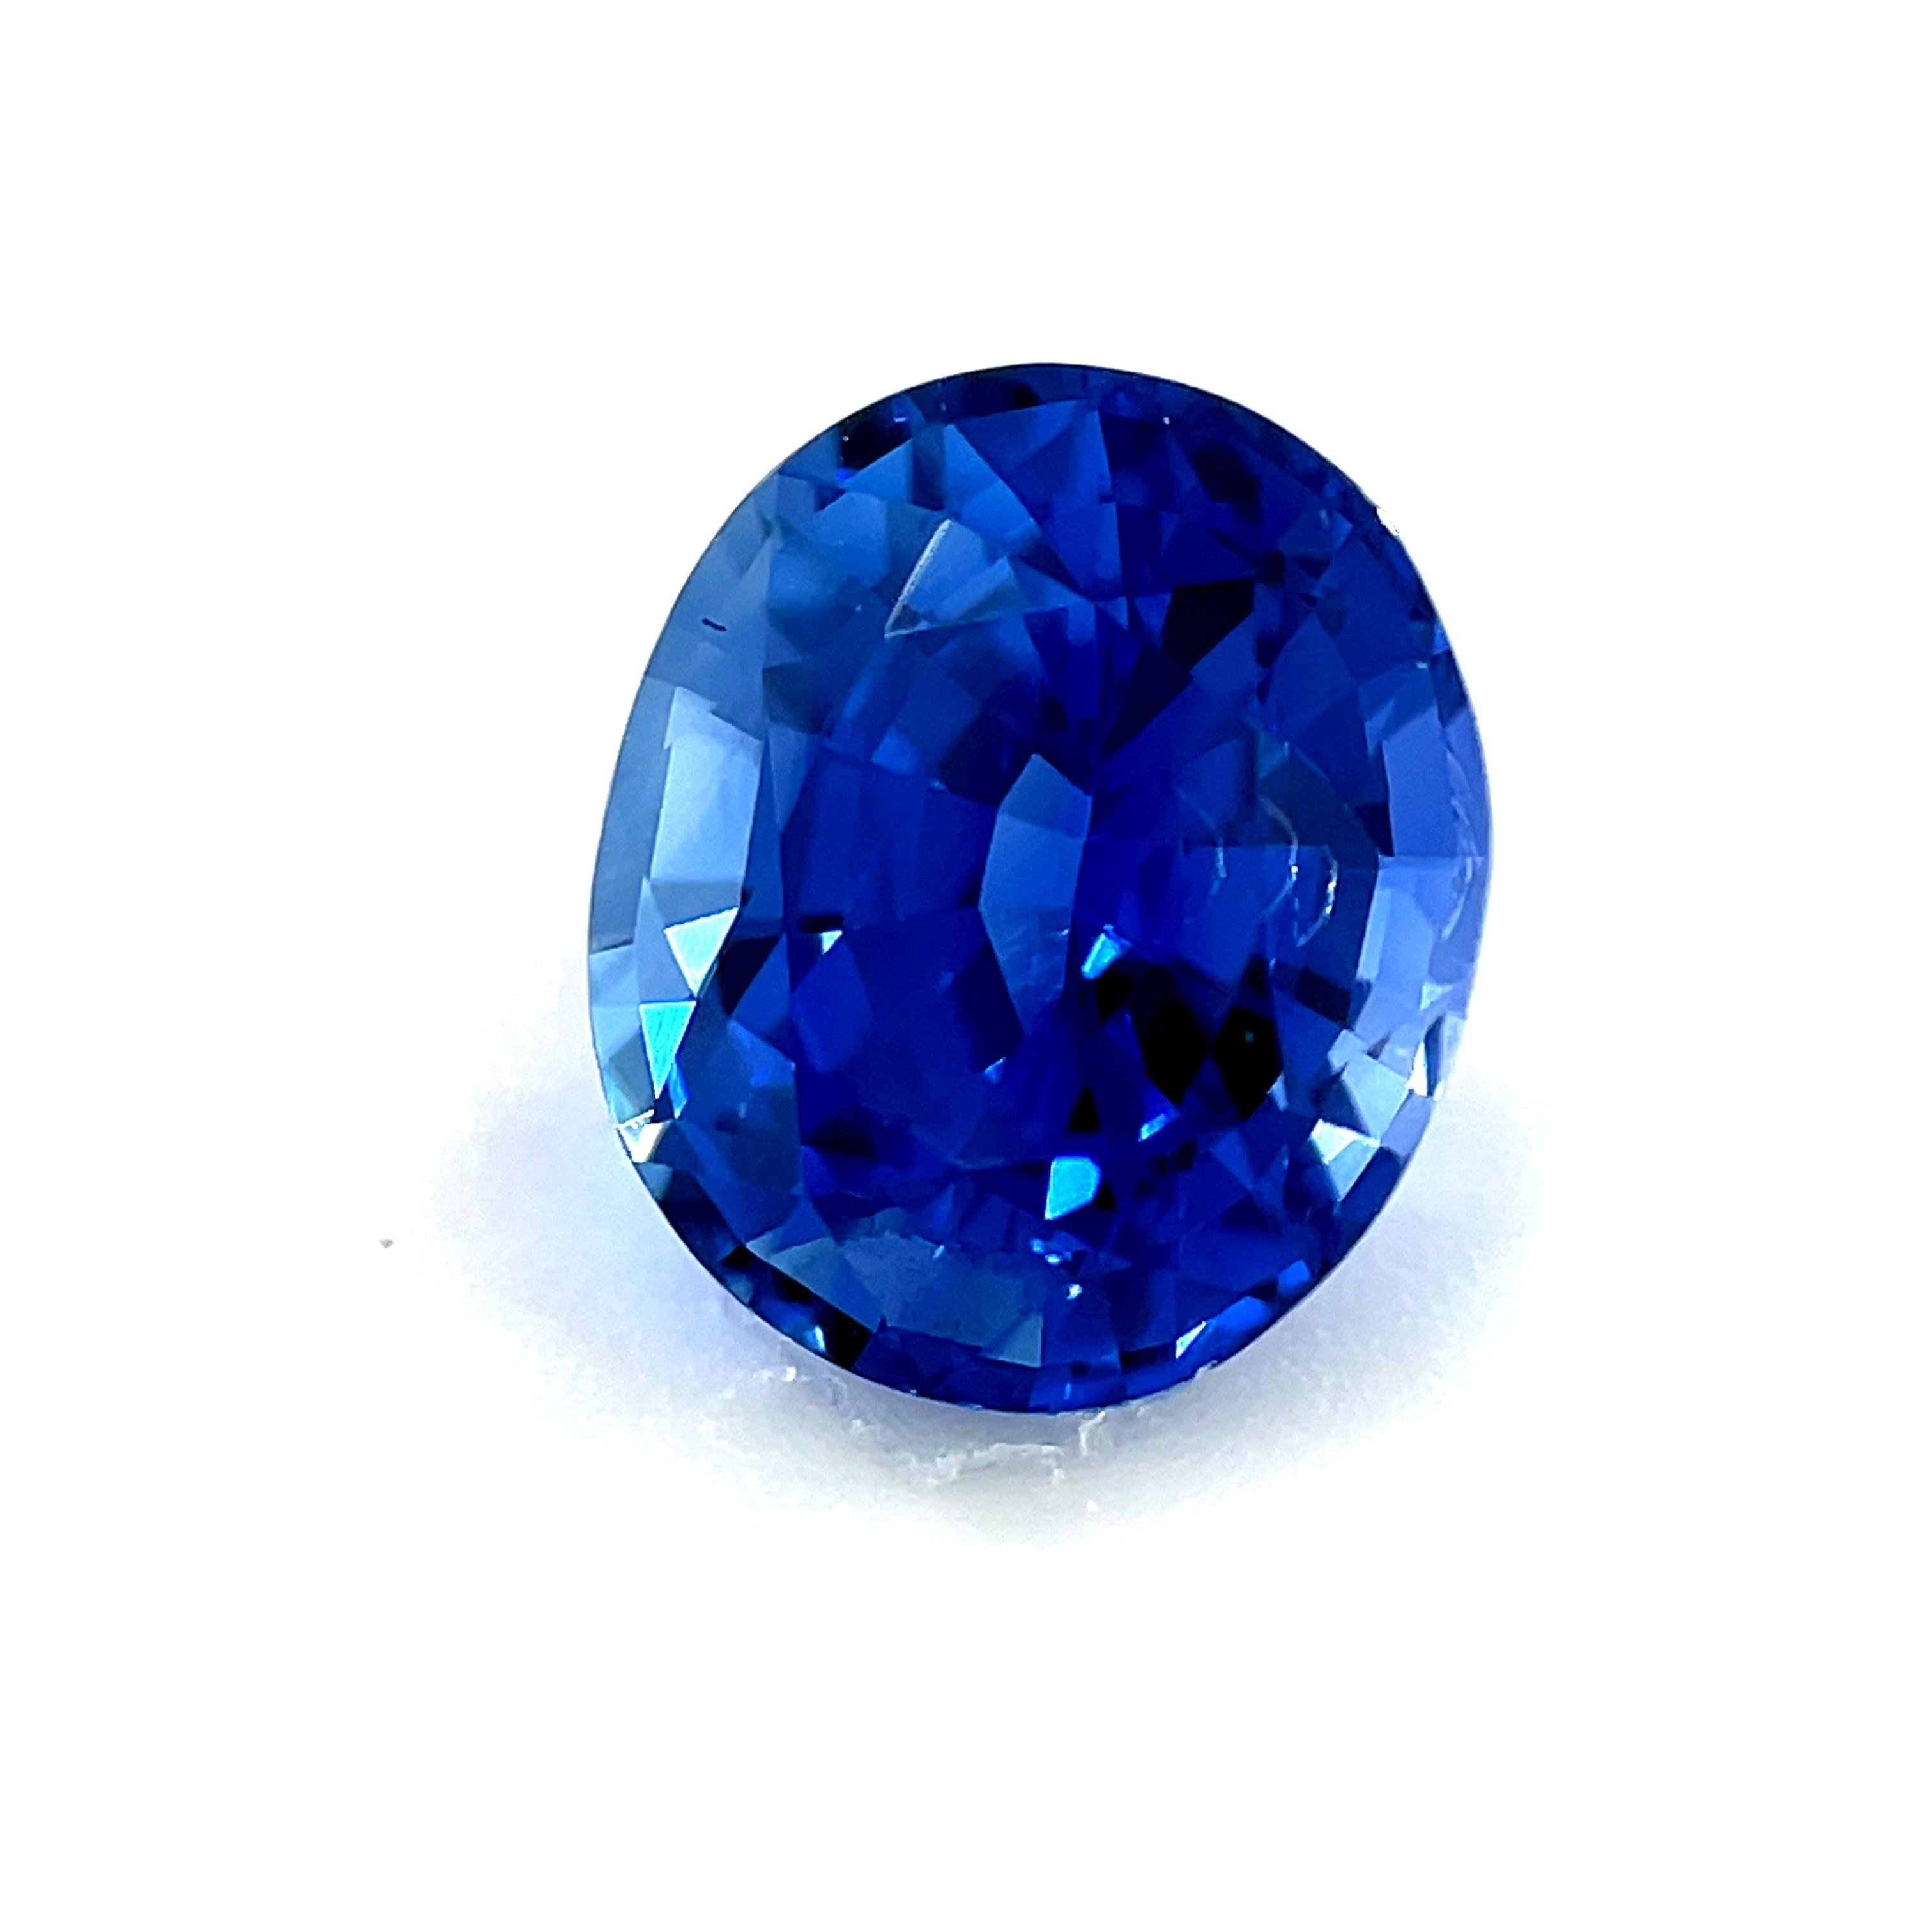 Women's or Men's 2.39 Carat Unheated Madagascar Blue Sapphire, Loose Gemstone, GIA Certified For Sale